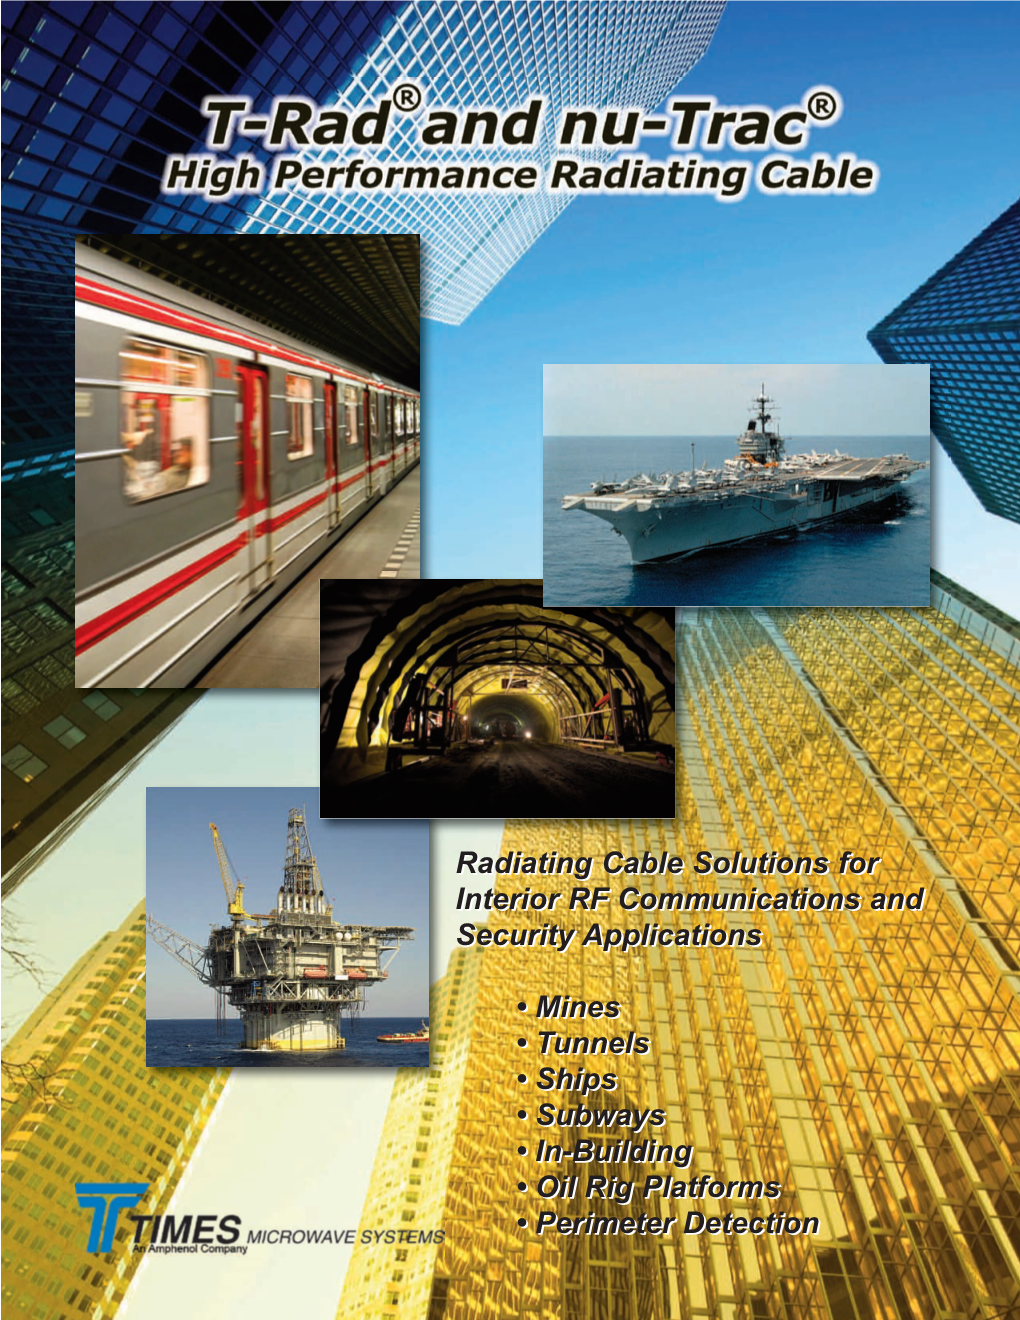 Radiating Cable Solutions for Interior RF Communications and Security